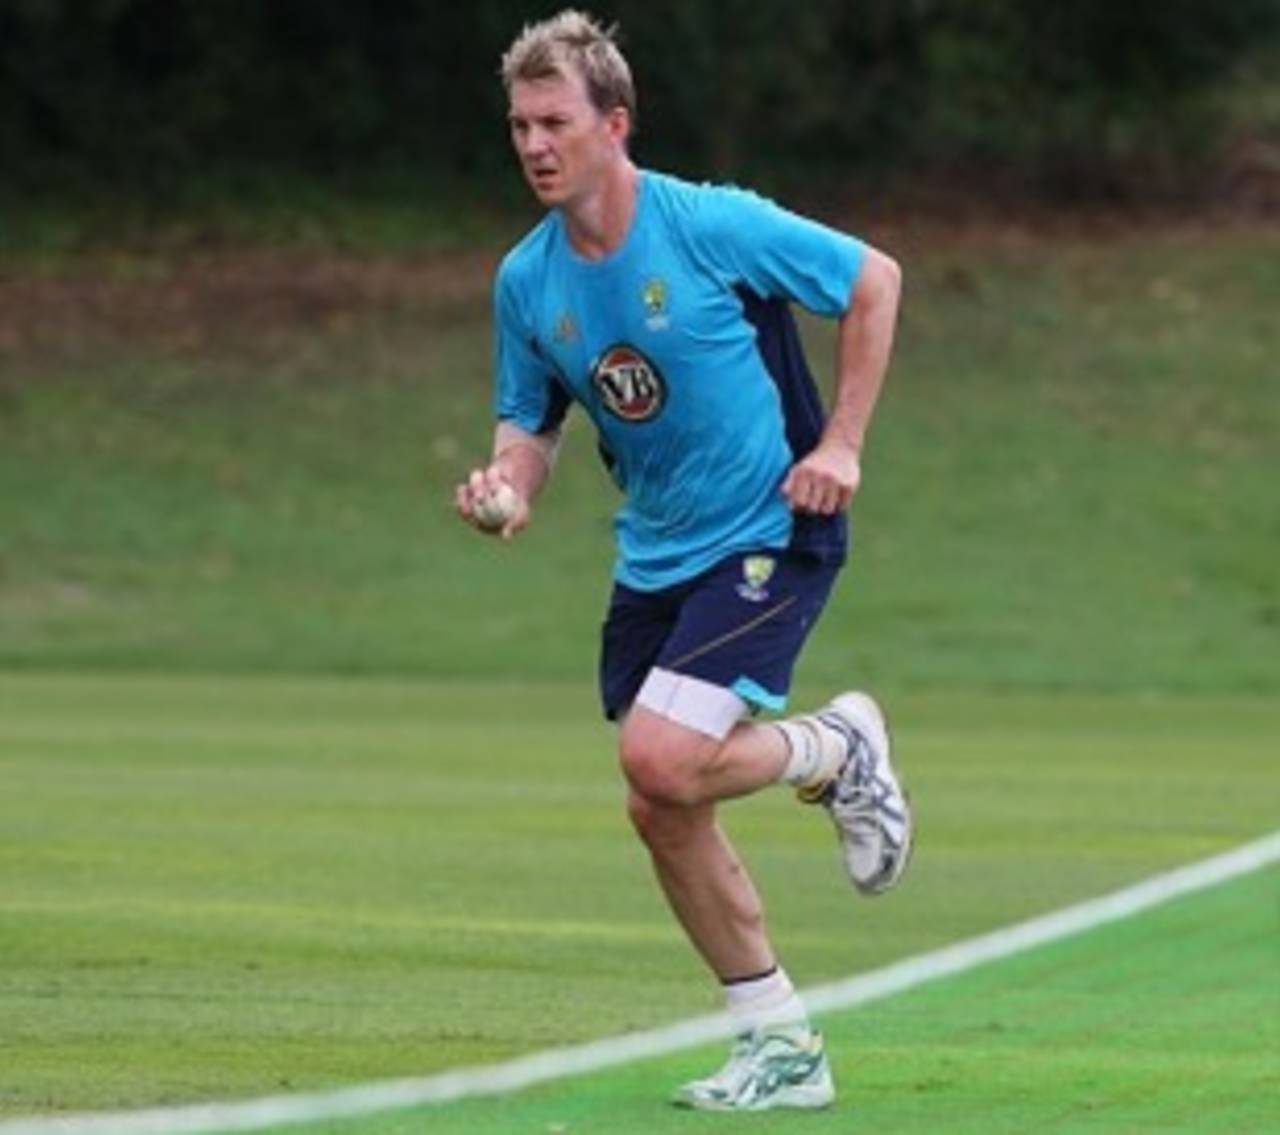 Canterbury and Wellington have shown interest in signing Brett Lee&nbsp;&nbsp;&bull;&nbsp;&nbsp;Getty Images